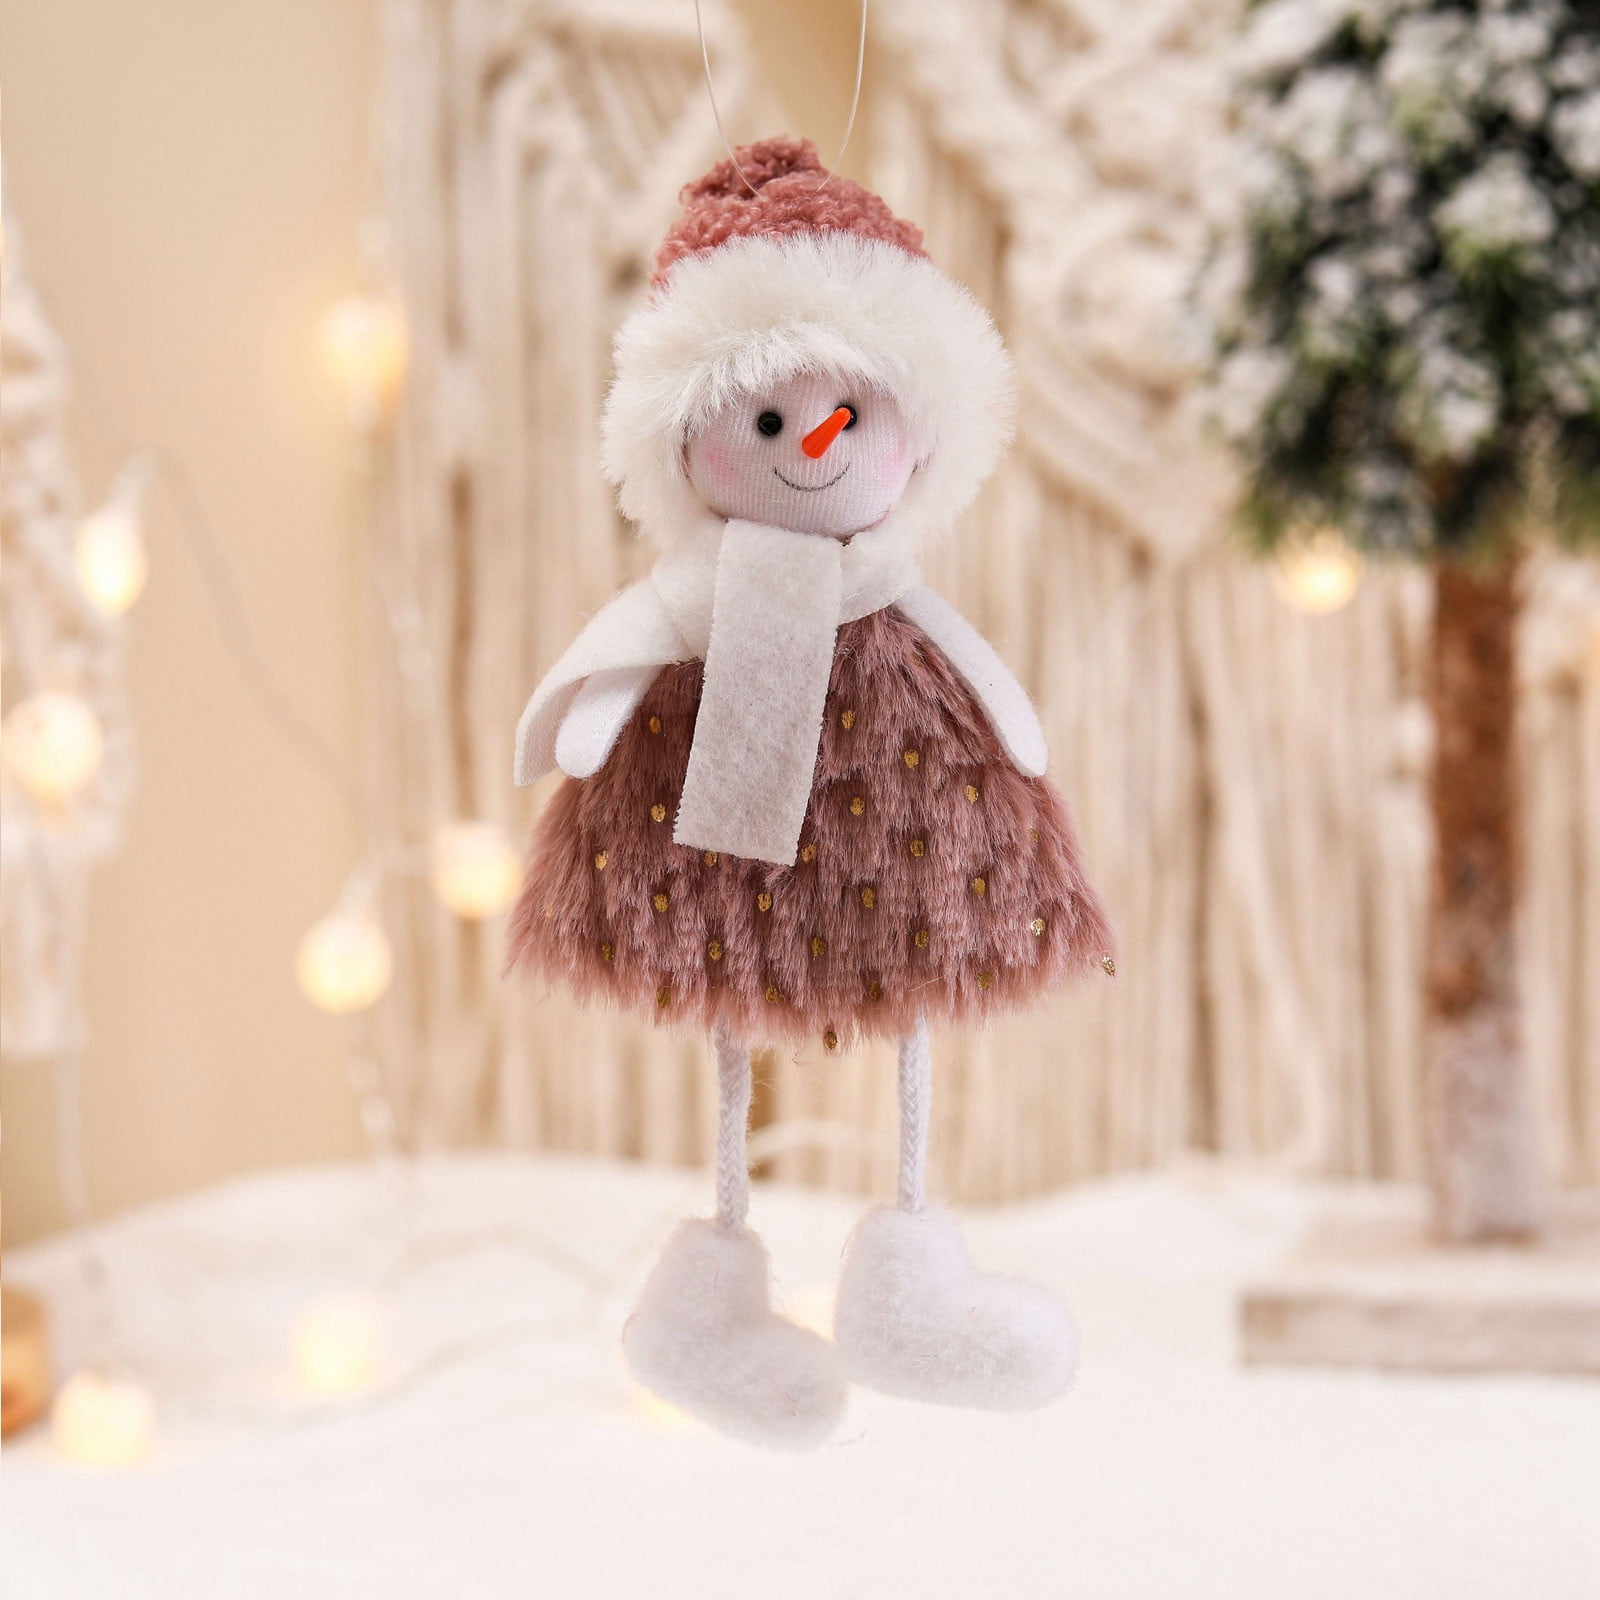 Chiccall Christmas Decorations Clearance,New Christmas Decorations ...